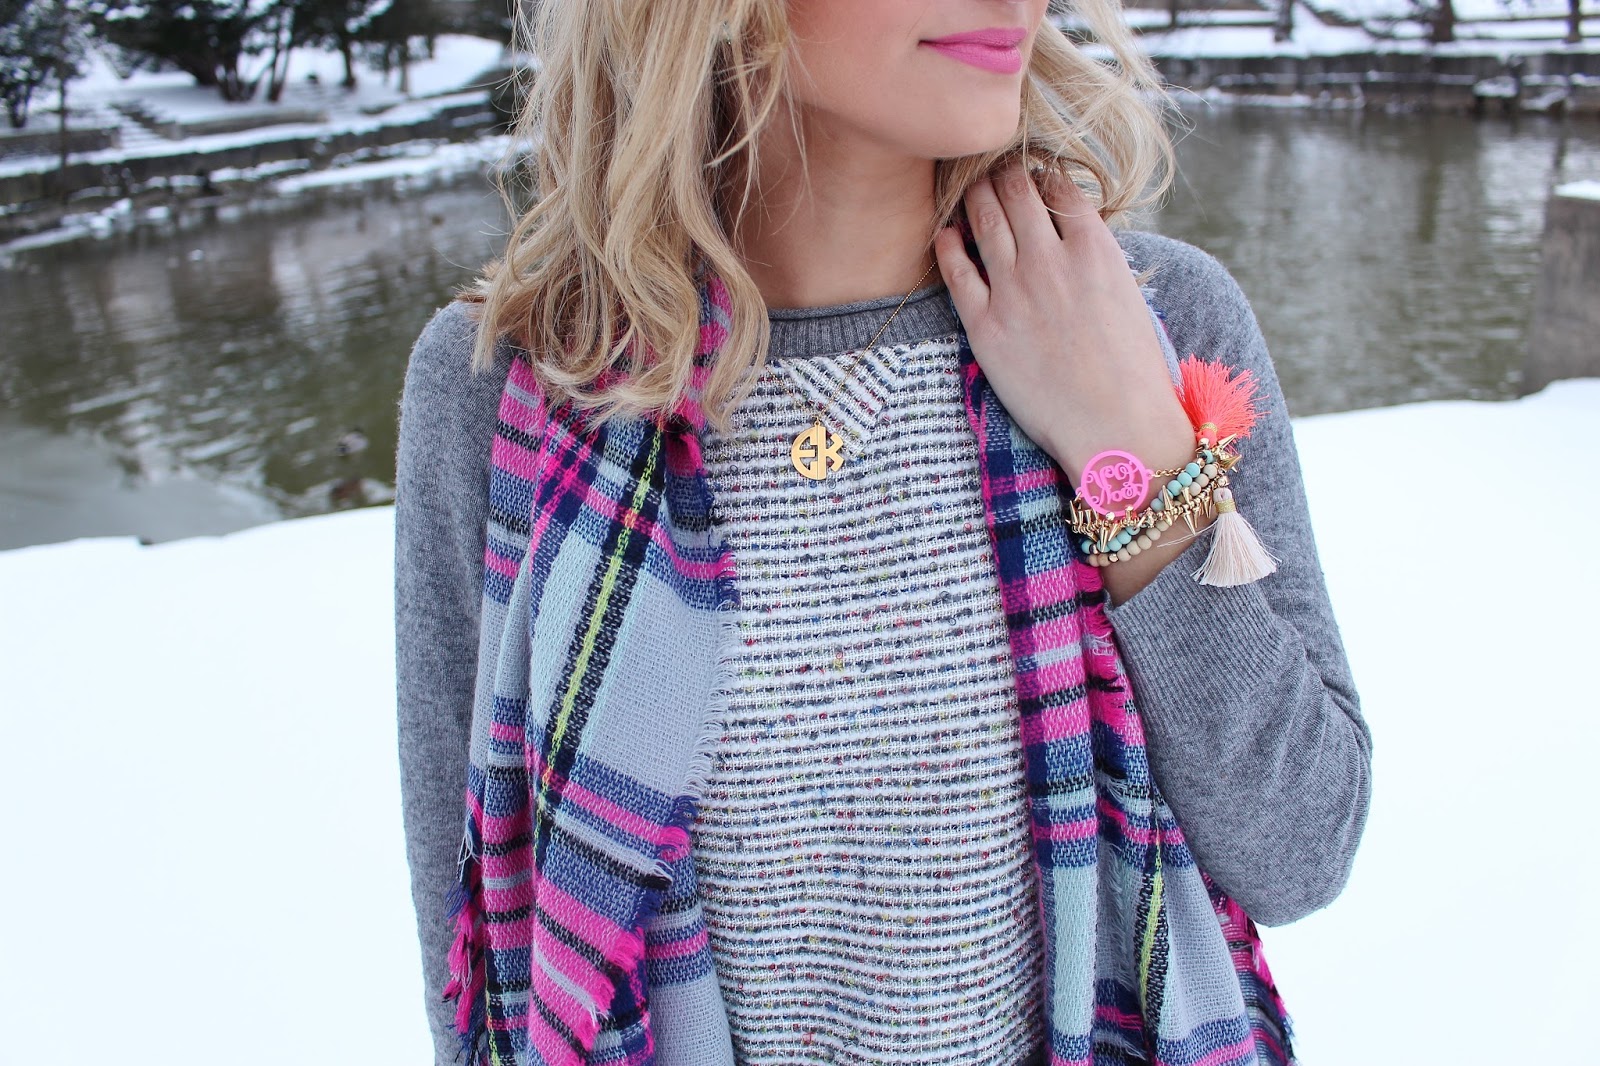 bijuleni- Boyfriend jeans with plaid colourful scarf and sweater